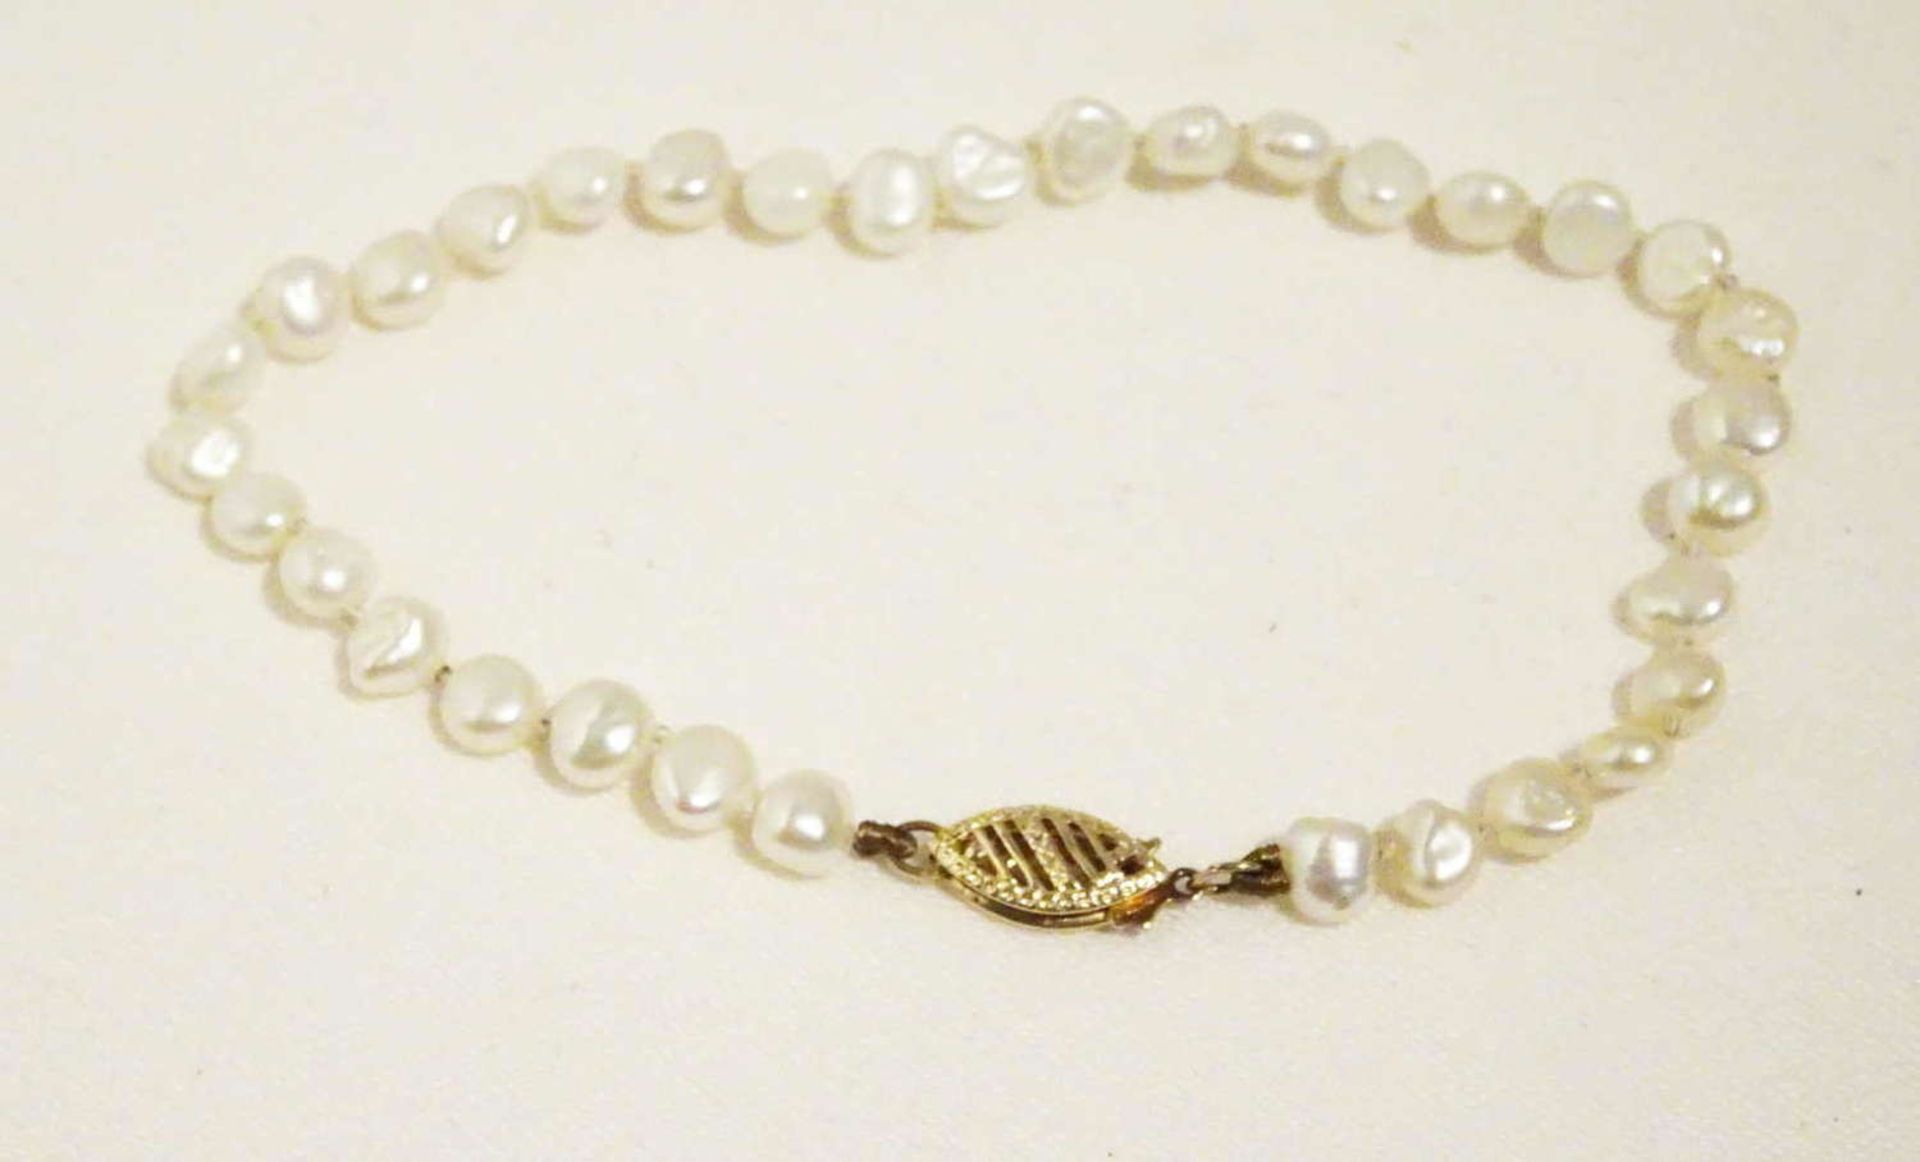 River pearl bracelet, 585 yellow gold clasp, length approx. 18 cm.